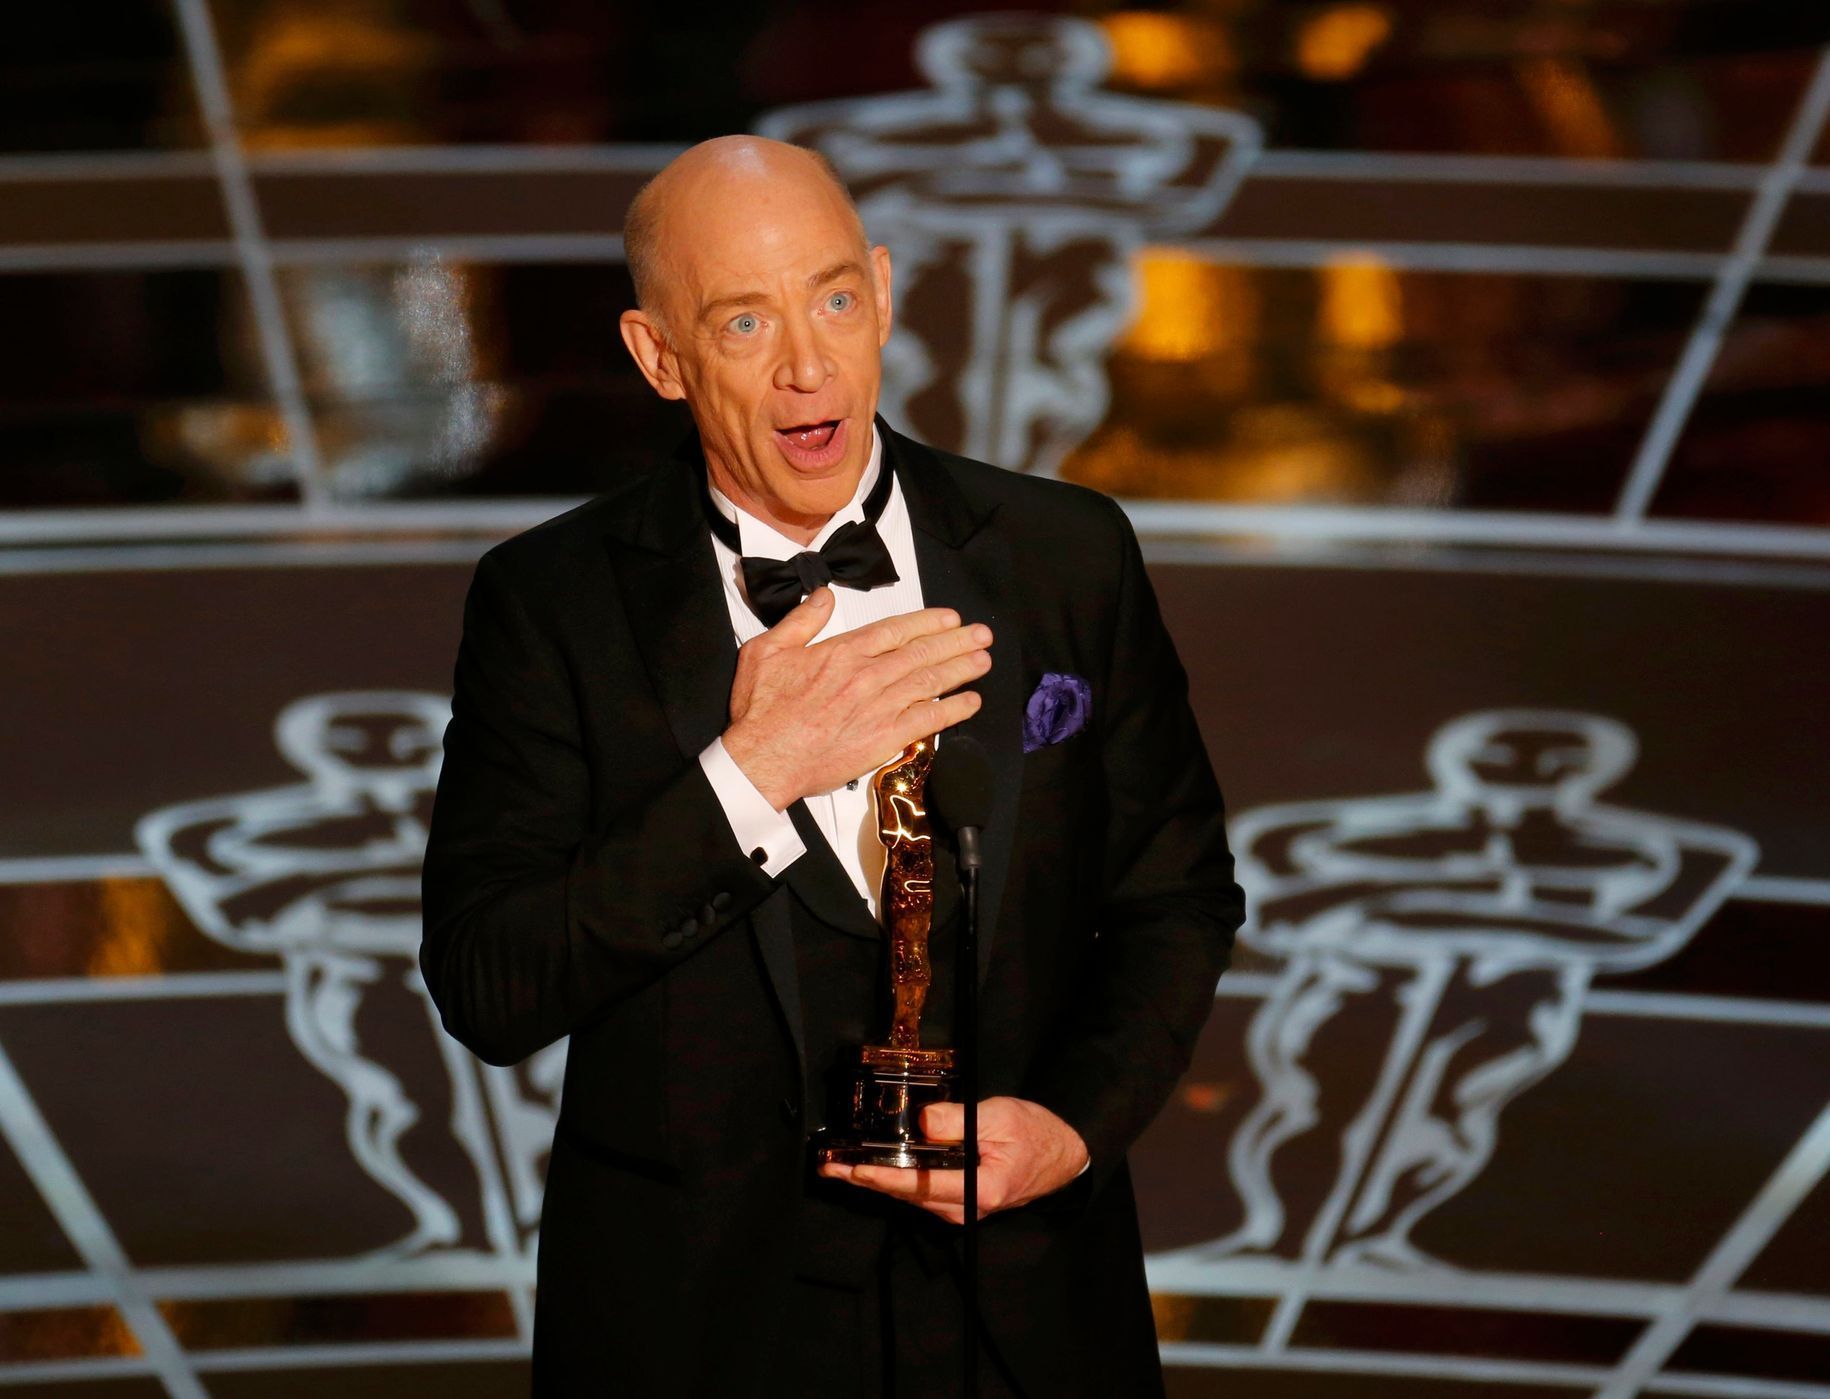 J.K. Simmons receives the Oscar for actor in a supporting role for &quot;Whiplash&quot; at the 87th Academy Awards in Hollywood, California